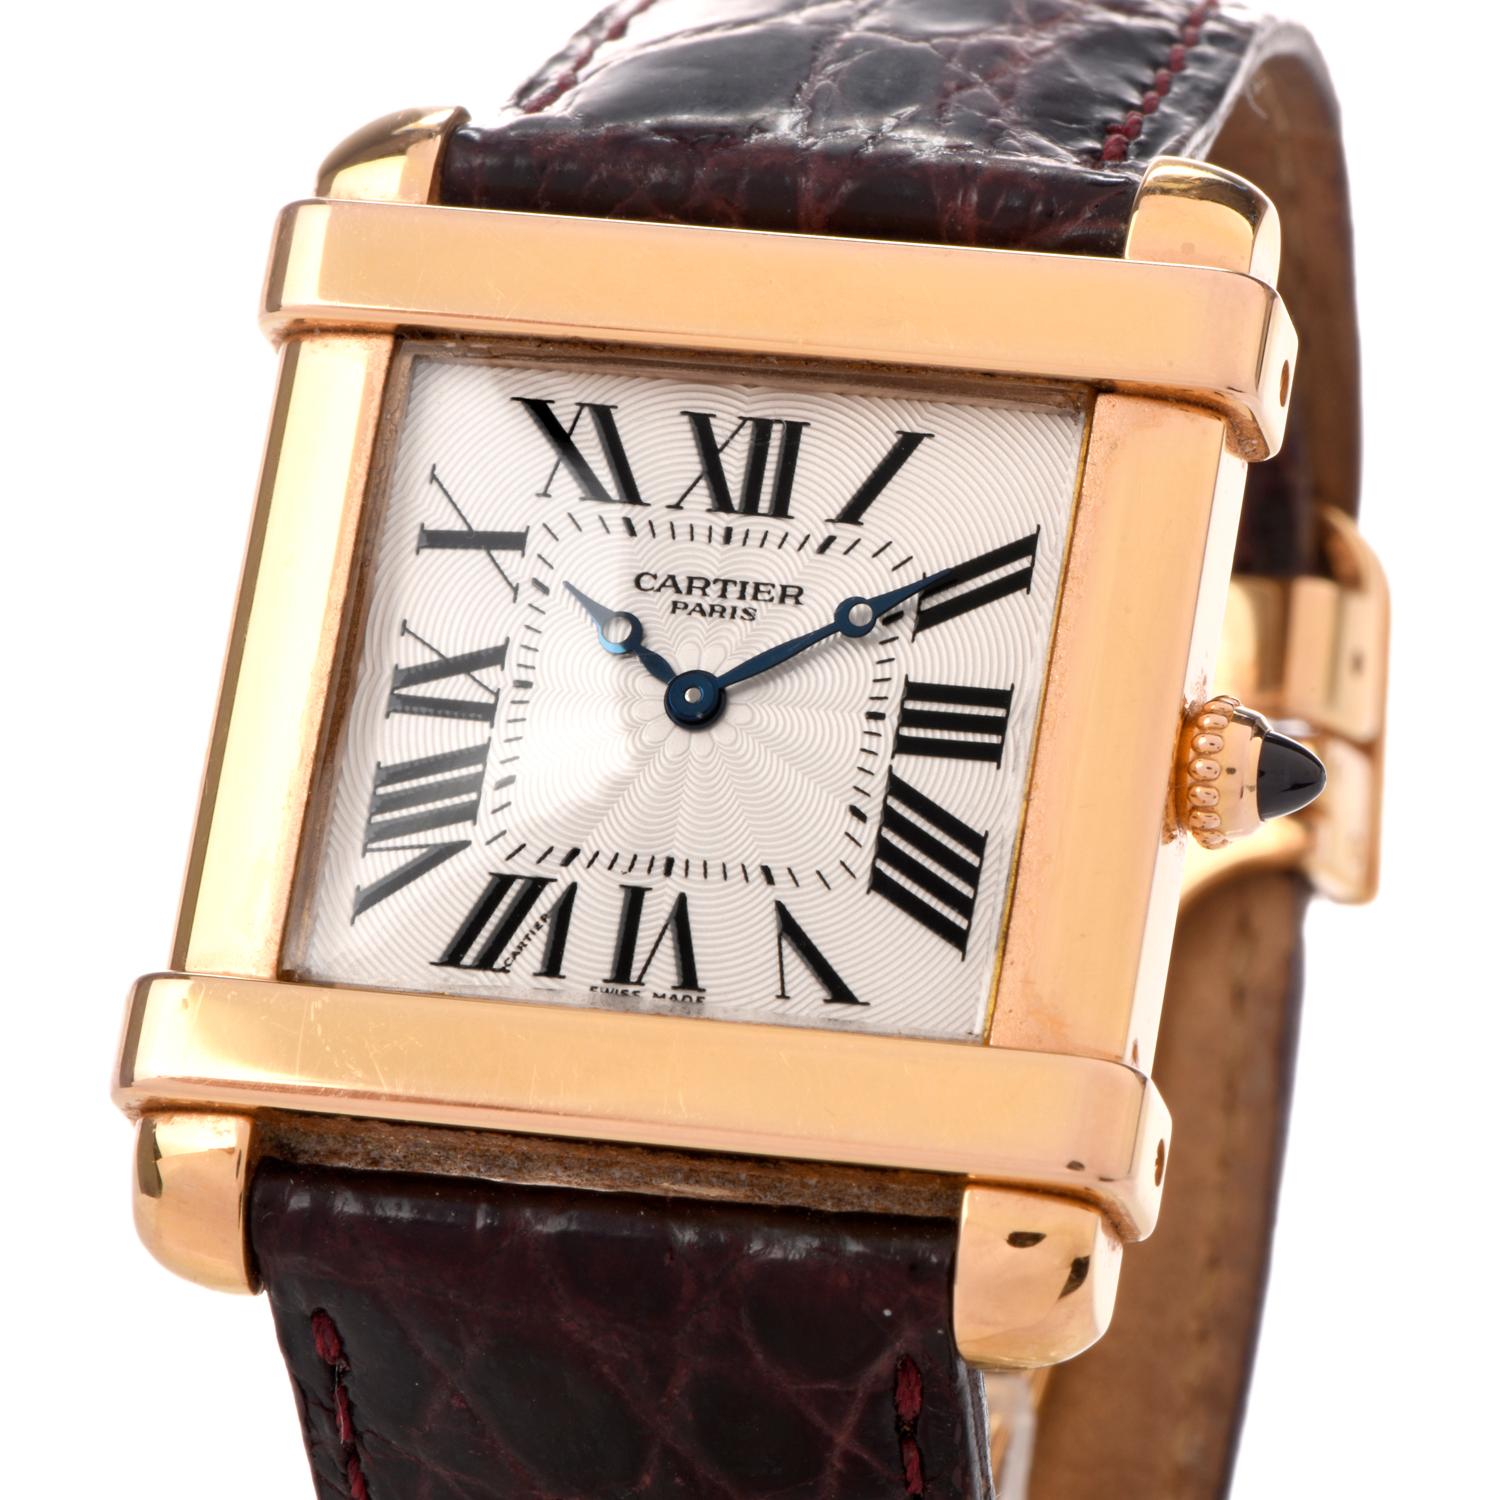 Preowned Pristine condition Men's or ladies Cartier Tank Watch crafted in 18K yellow gold. Circa 2005 and after.

Dial is white ribbed with black Roman numberal markers  Scratch resistant Sapphire crystal on front and back of see through